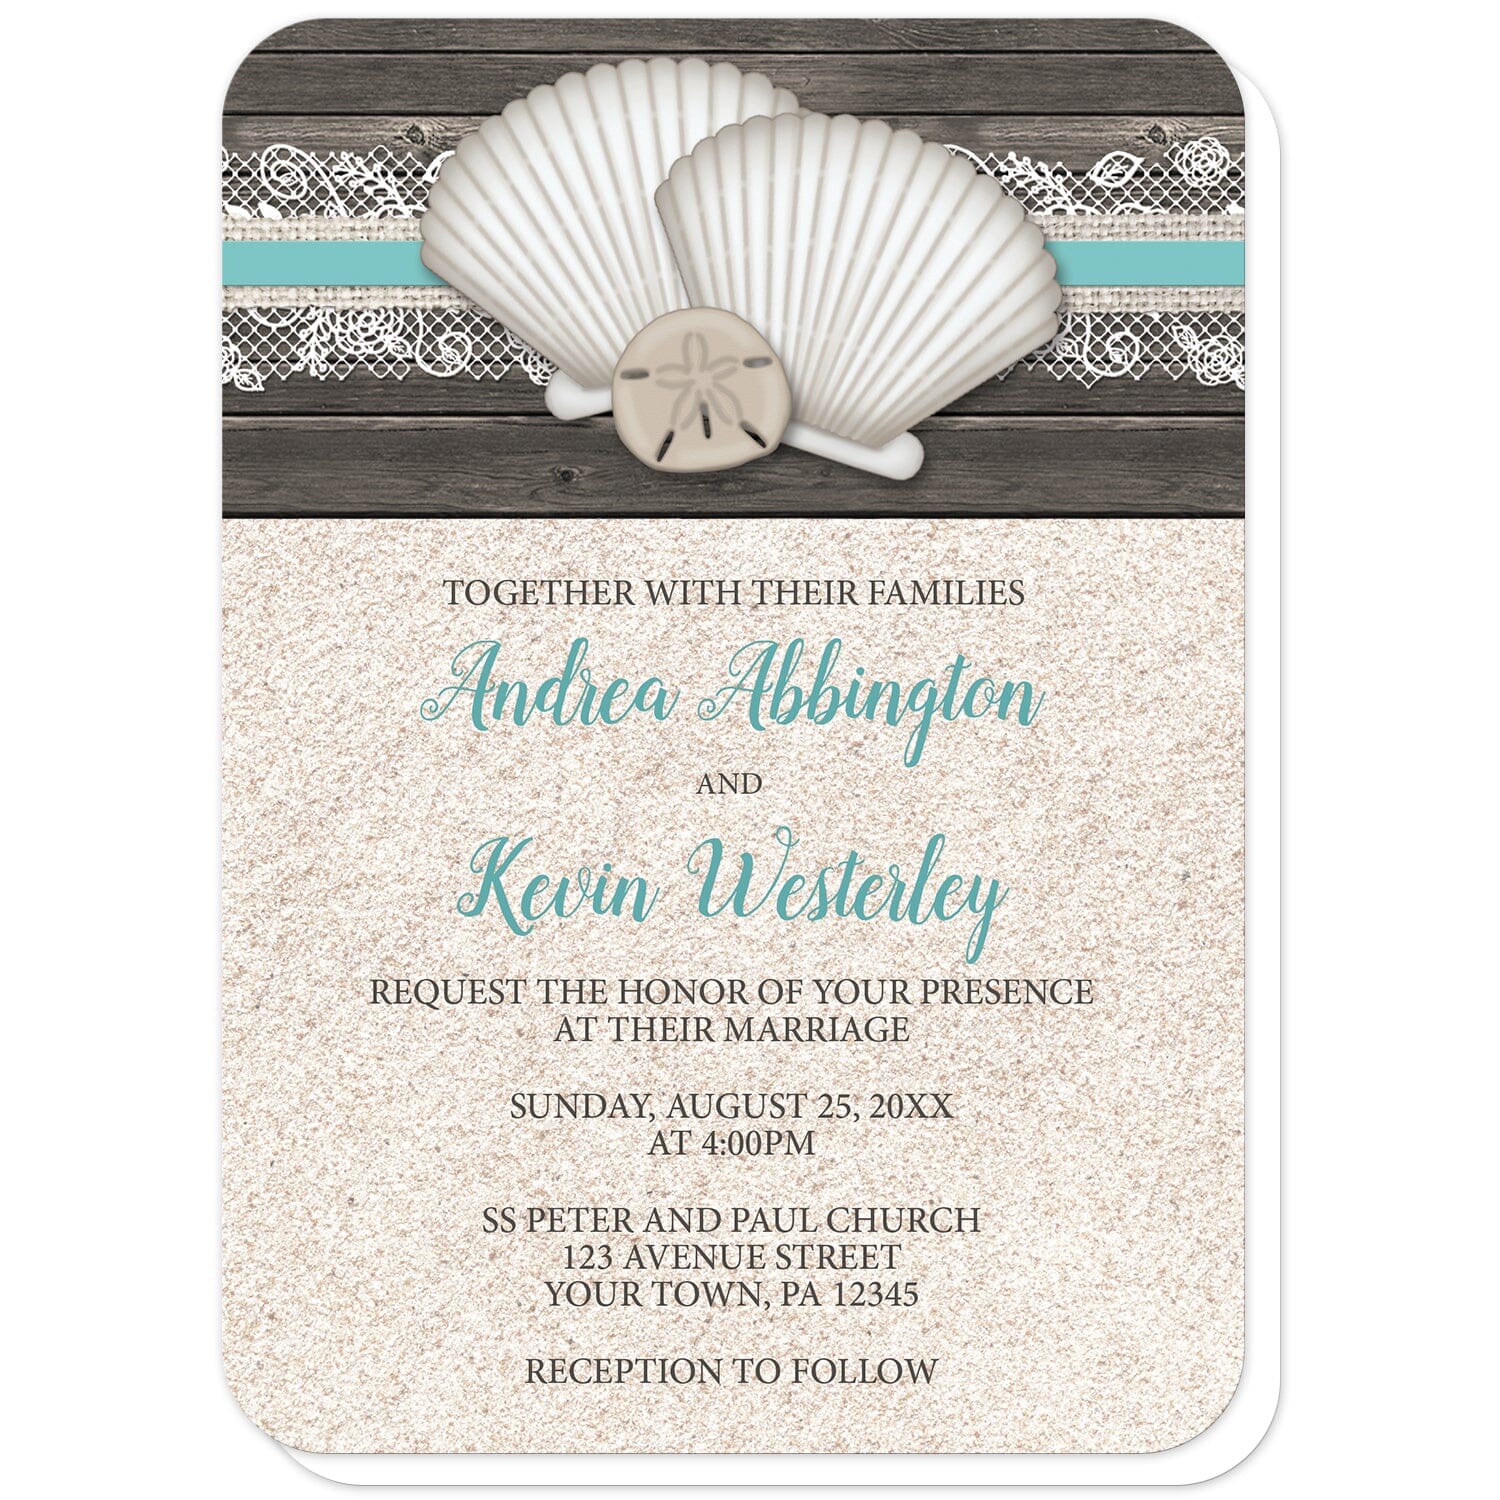 Seashell Lace Wood and Sand Beach Wedding Invitations (with rounded corners) at Artistically Invited. Rustic seashell lace wood and sand beach wedding invitations with two seashells and a sand dollar on a teal, burlap and lace ribbon over a dark brown wood pattern along the top. Your personalized marriage celebration details are custom printed in dark brown and teal over a beige sand background design below the seashells.